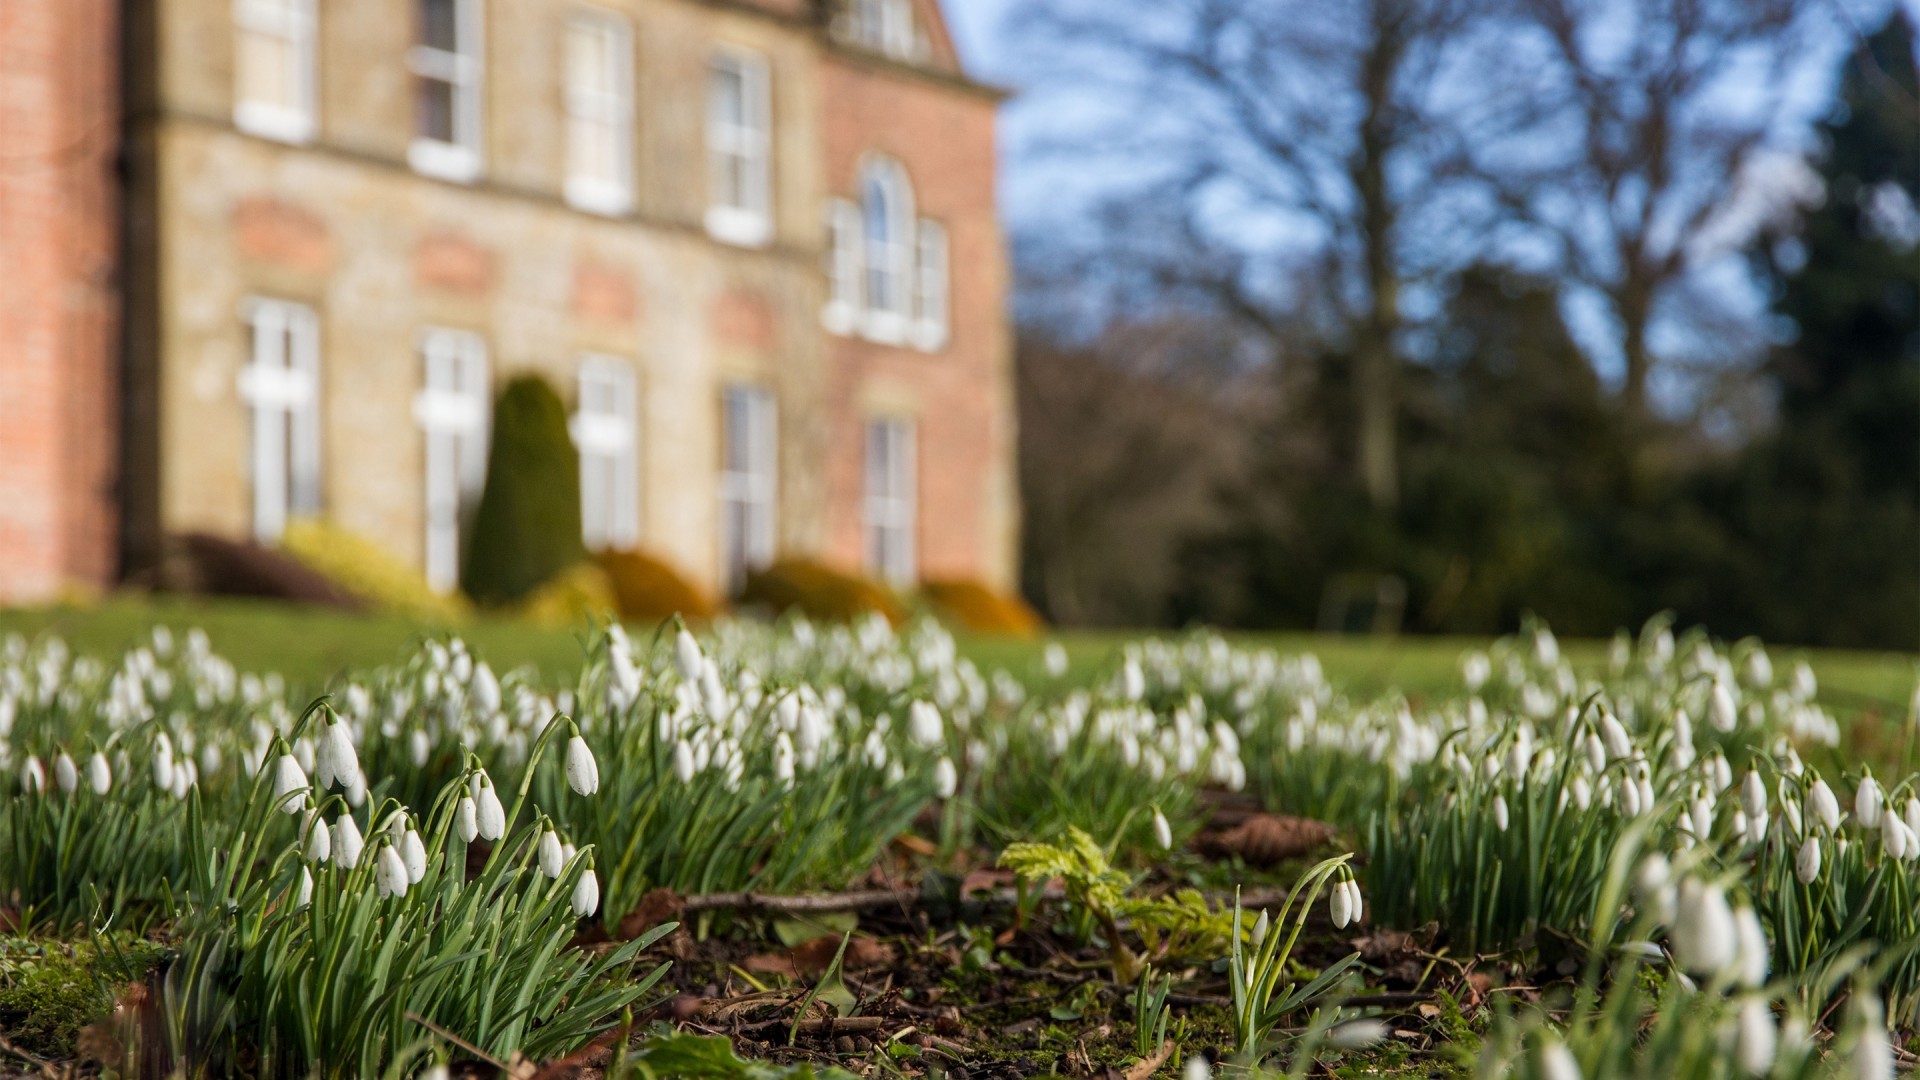 General 1920x1080 flowers blurred snowdrops white flowers UK plants outdoors